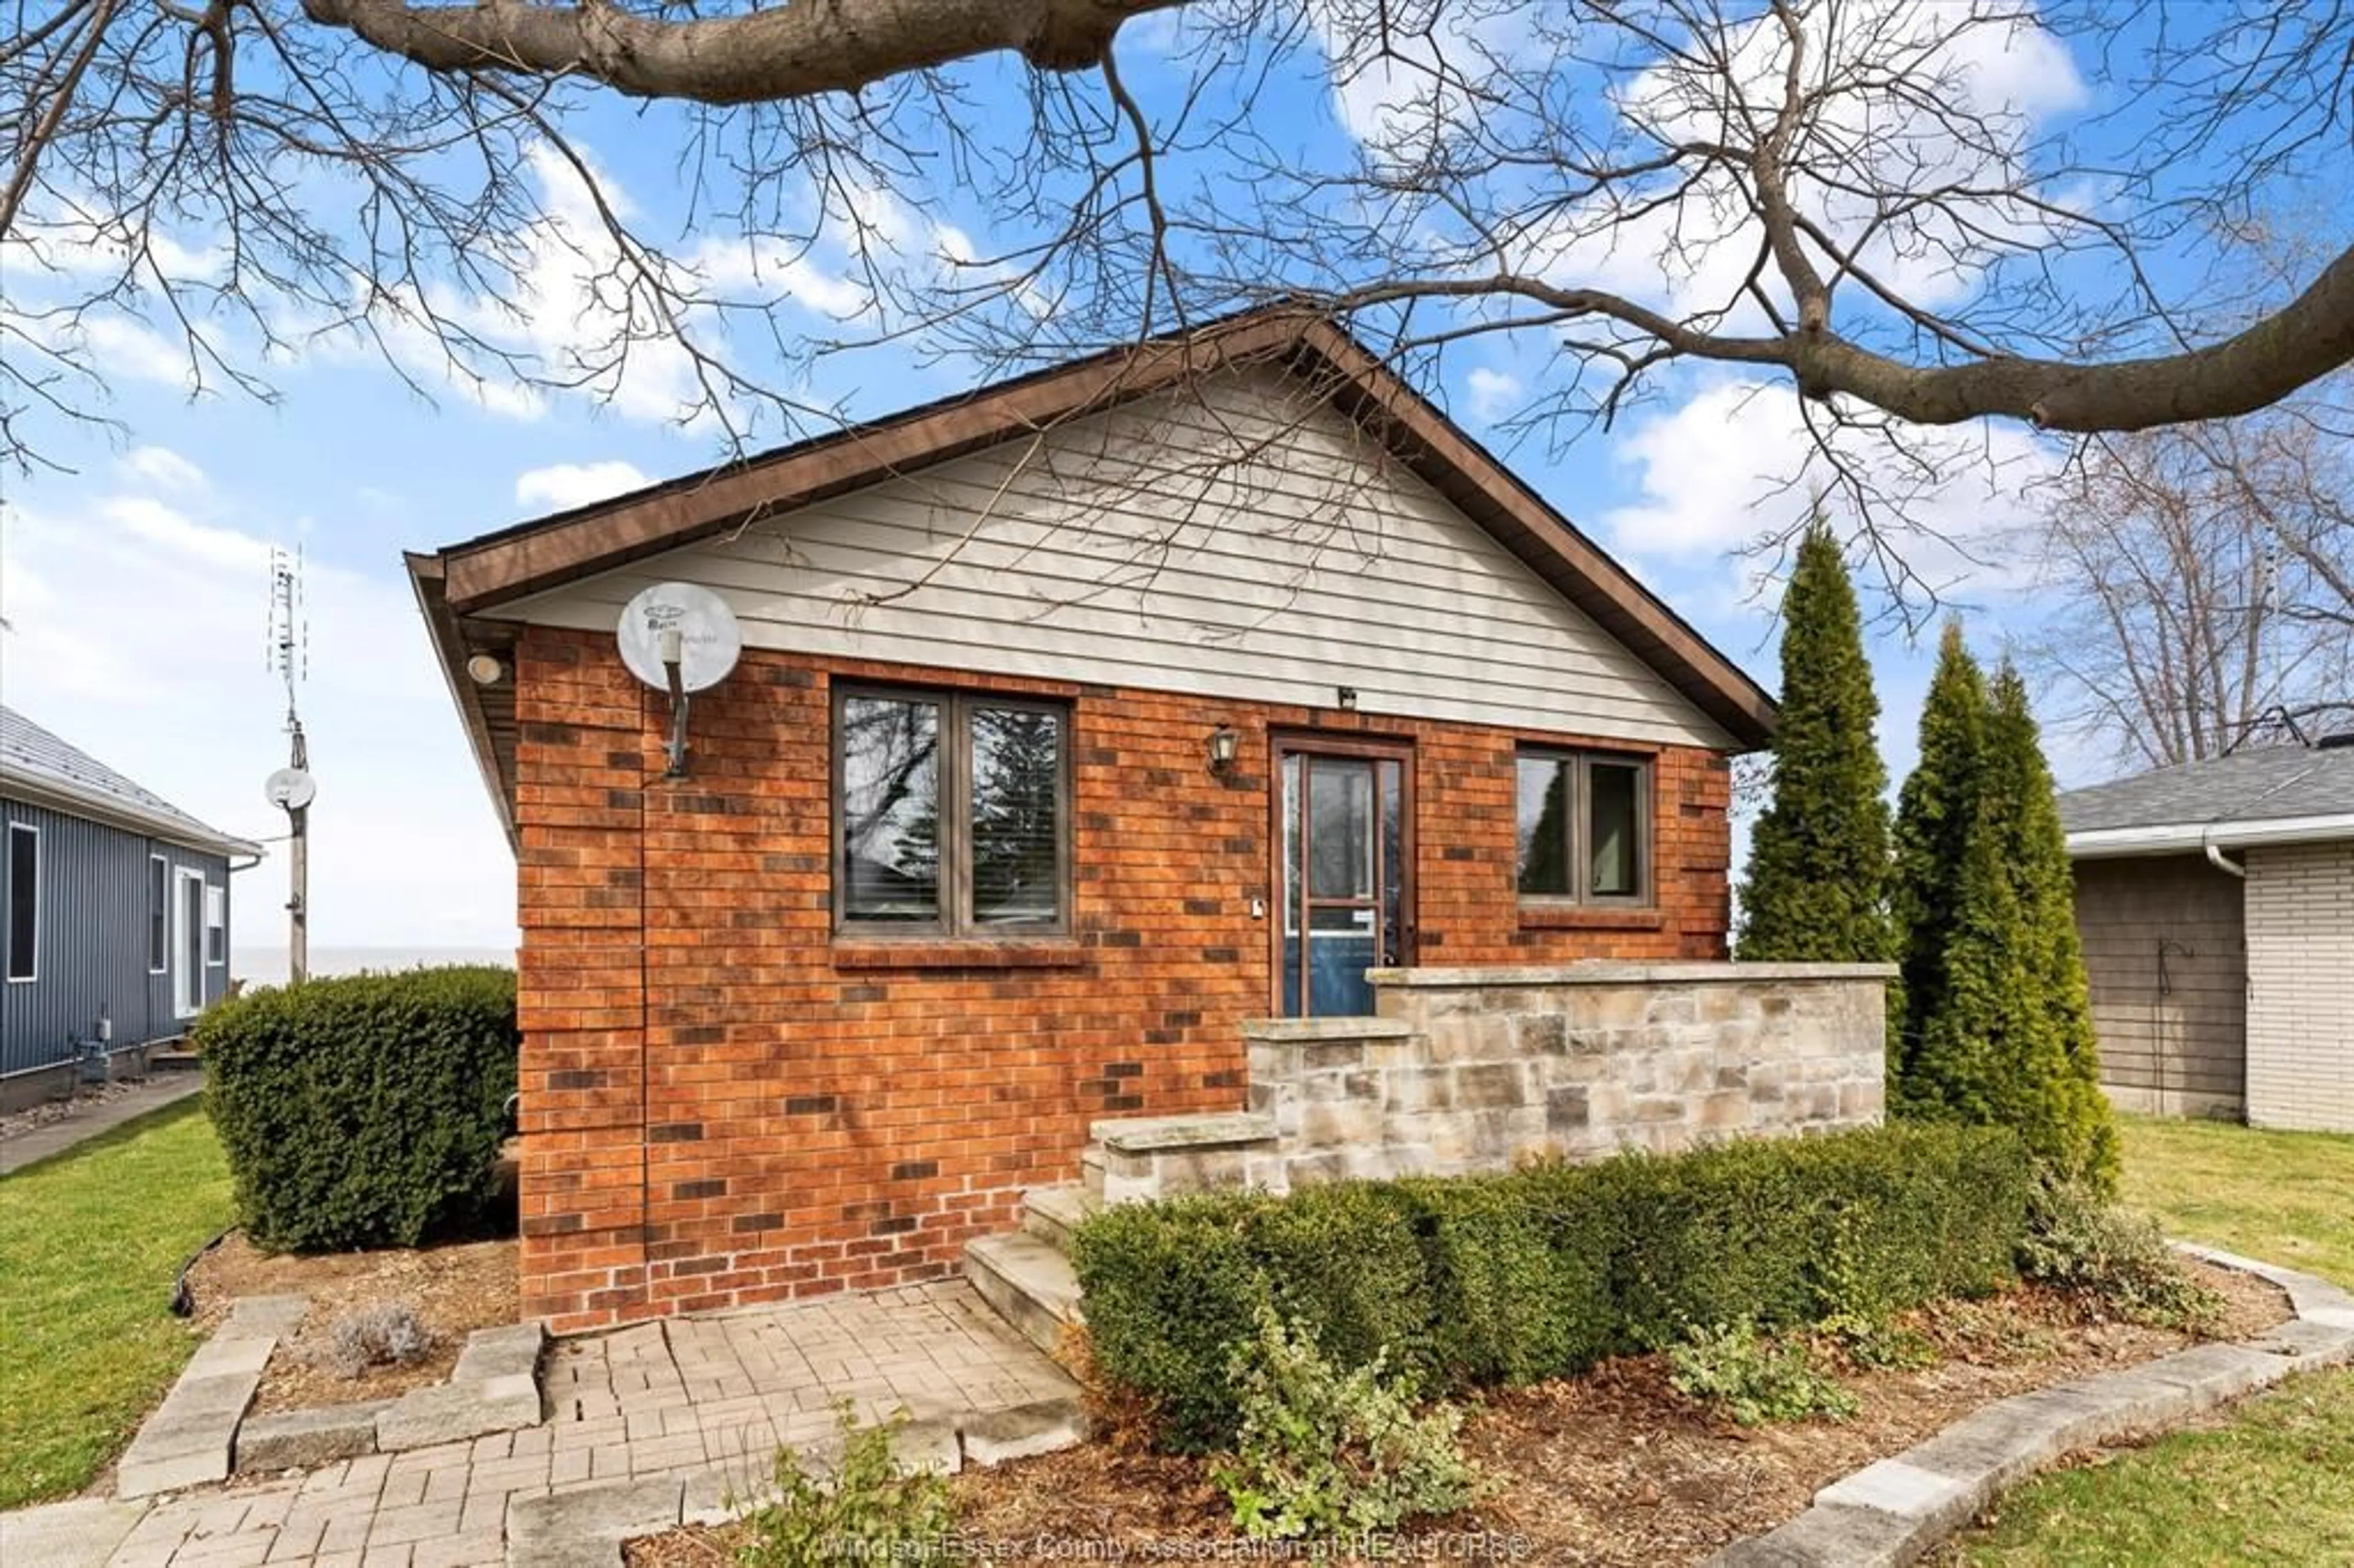 Home with brick exterior material for 7030 ST. CLAIR, Lakeshore Ontario N0R 1N0